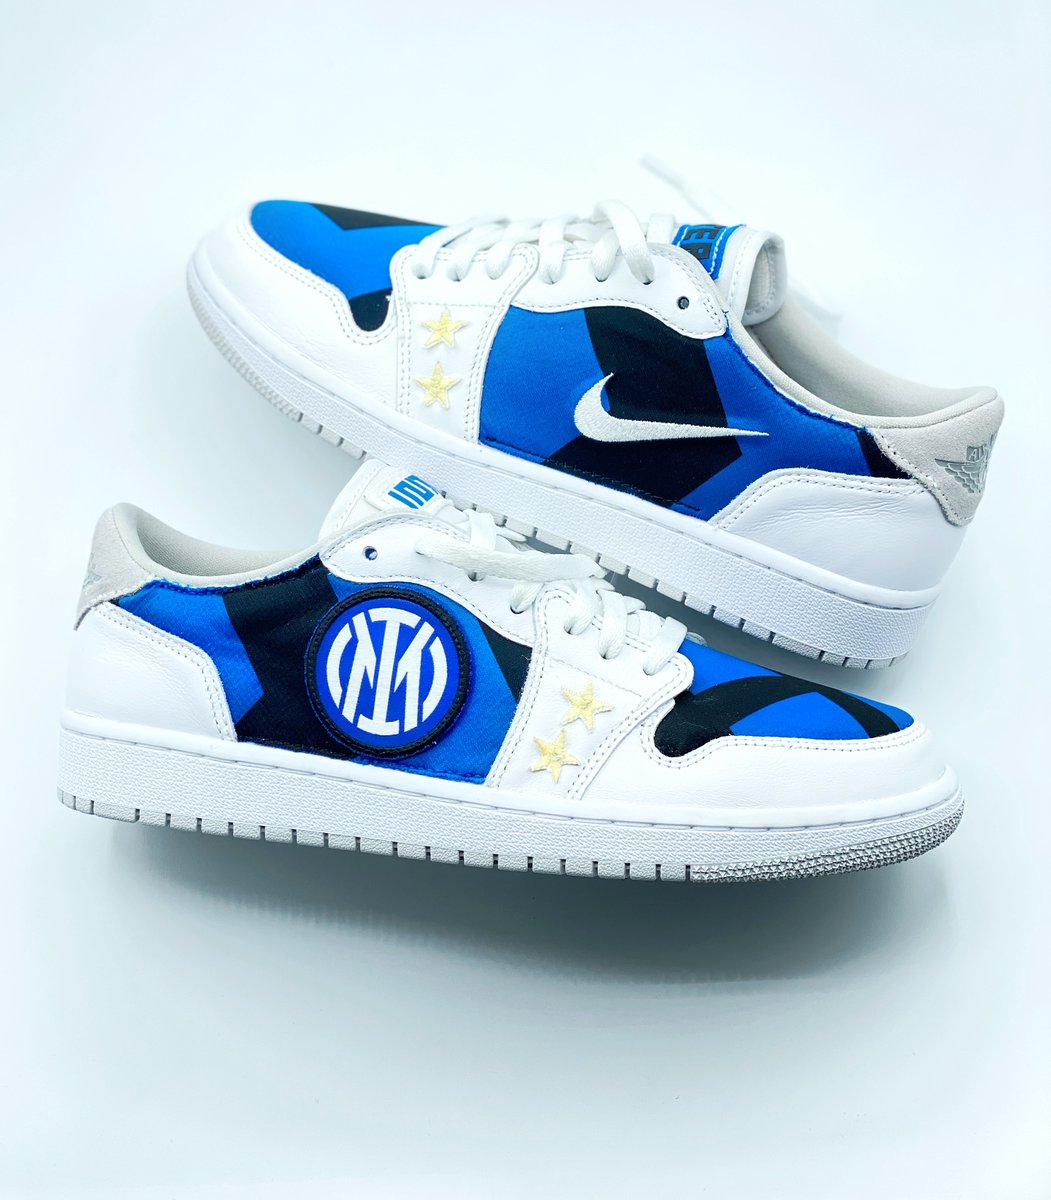 Celebrating @Inter's recent Scudetto in their own inimitable fashion, sneaker customiser Laboratorio 17 have created a bespoke Jordan 1 using old club home shirts. See more here: soccerbible.com/lifestyle/snea…